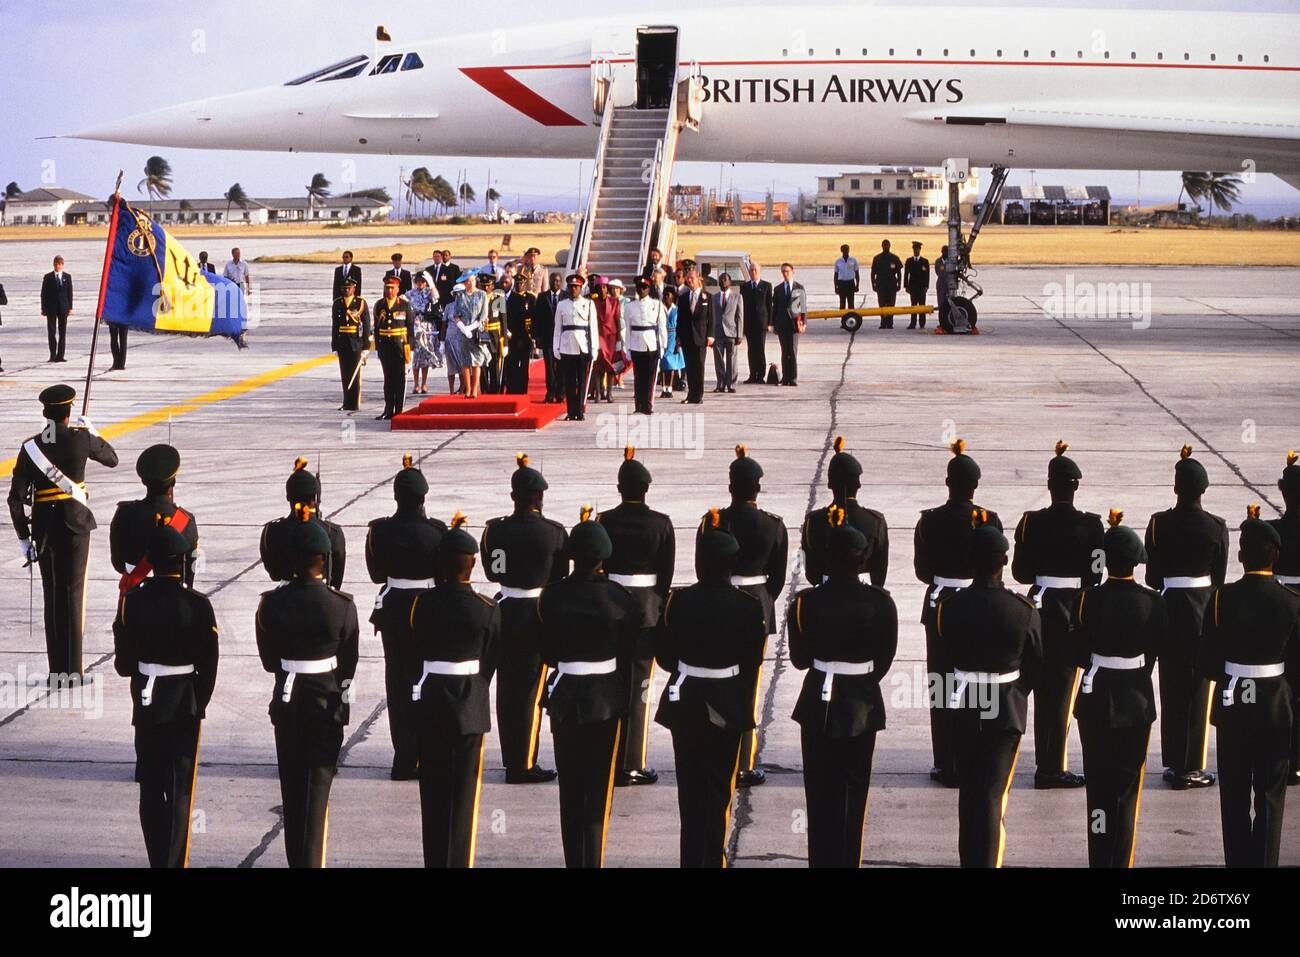 Britain's Queen Elizabeth II standing on the red carpet during a welcome ceremony after landing at Grantley Adams International Airport on a B.A. Concorde flight at the start of her four-day visit to the Caribbean Island of Barbados. March 8, 1989. Stock Photo